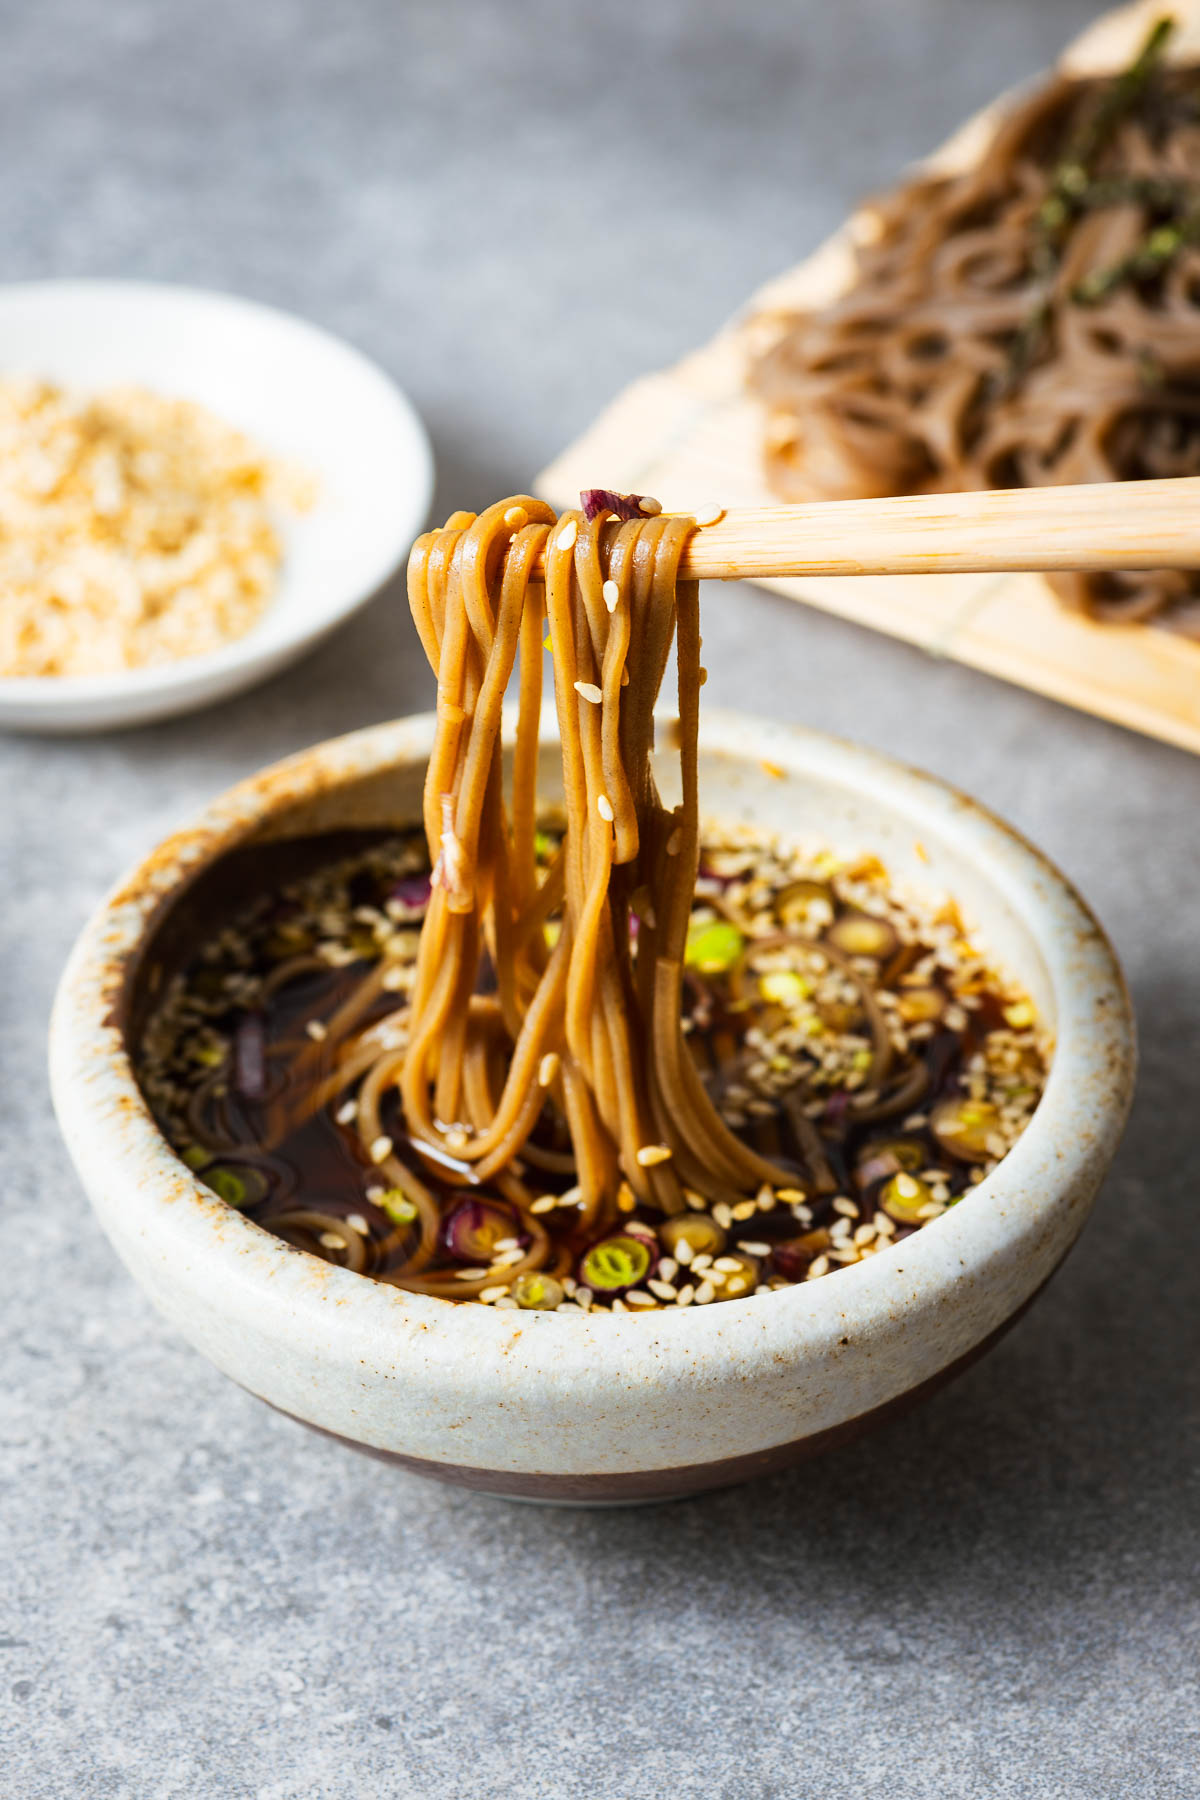 Cold soba noodles dipped into Japanese noodle dipping sauce.